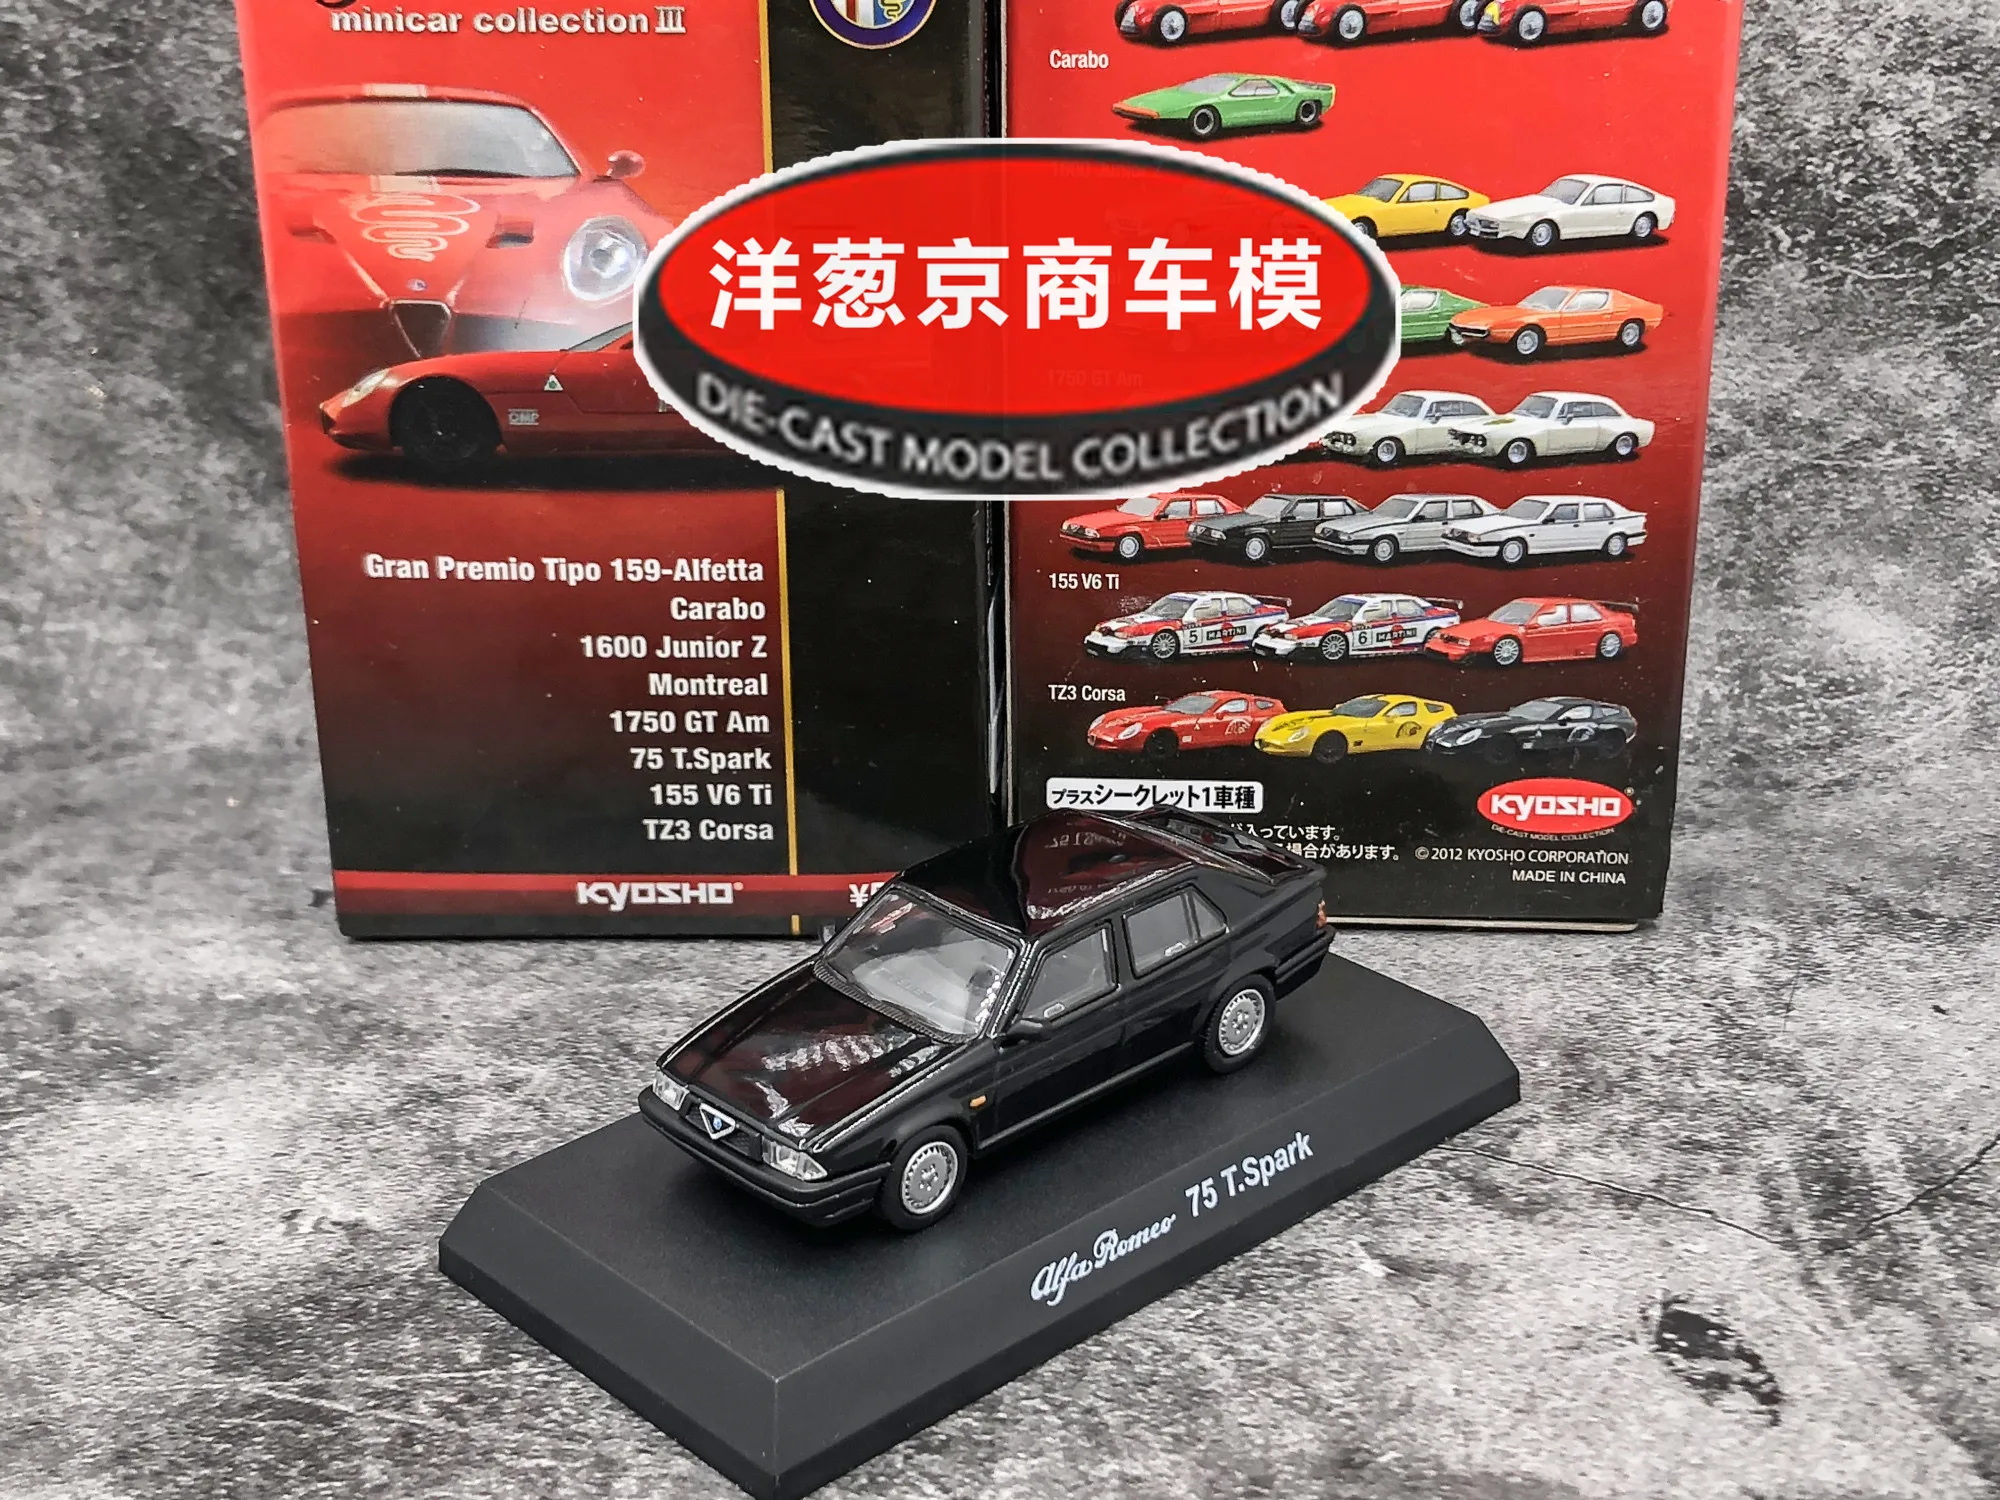 

Kyosho 1:64 Alfa Romeo 75 T.Spark Brilliant Black 1985 Collection of die-cast alloy car decoration model toys